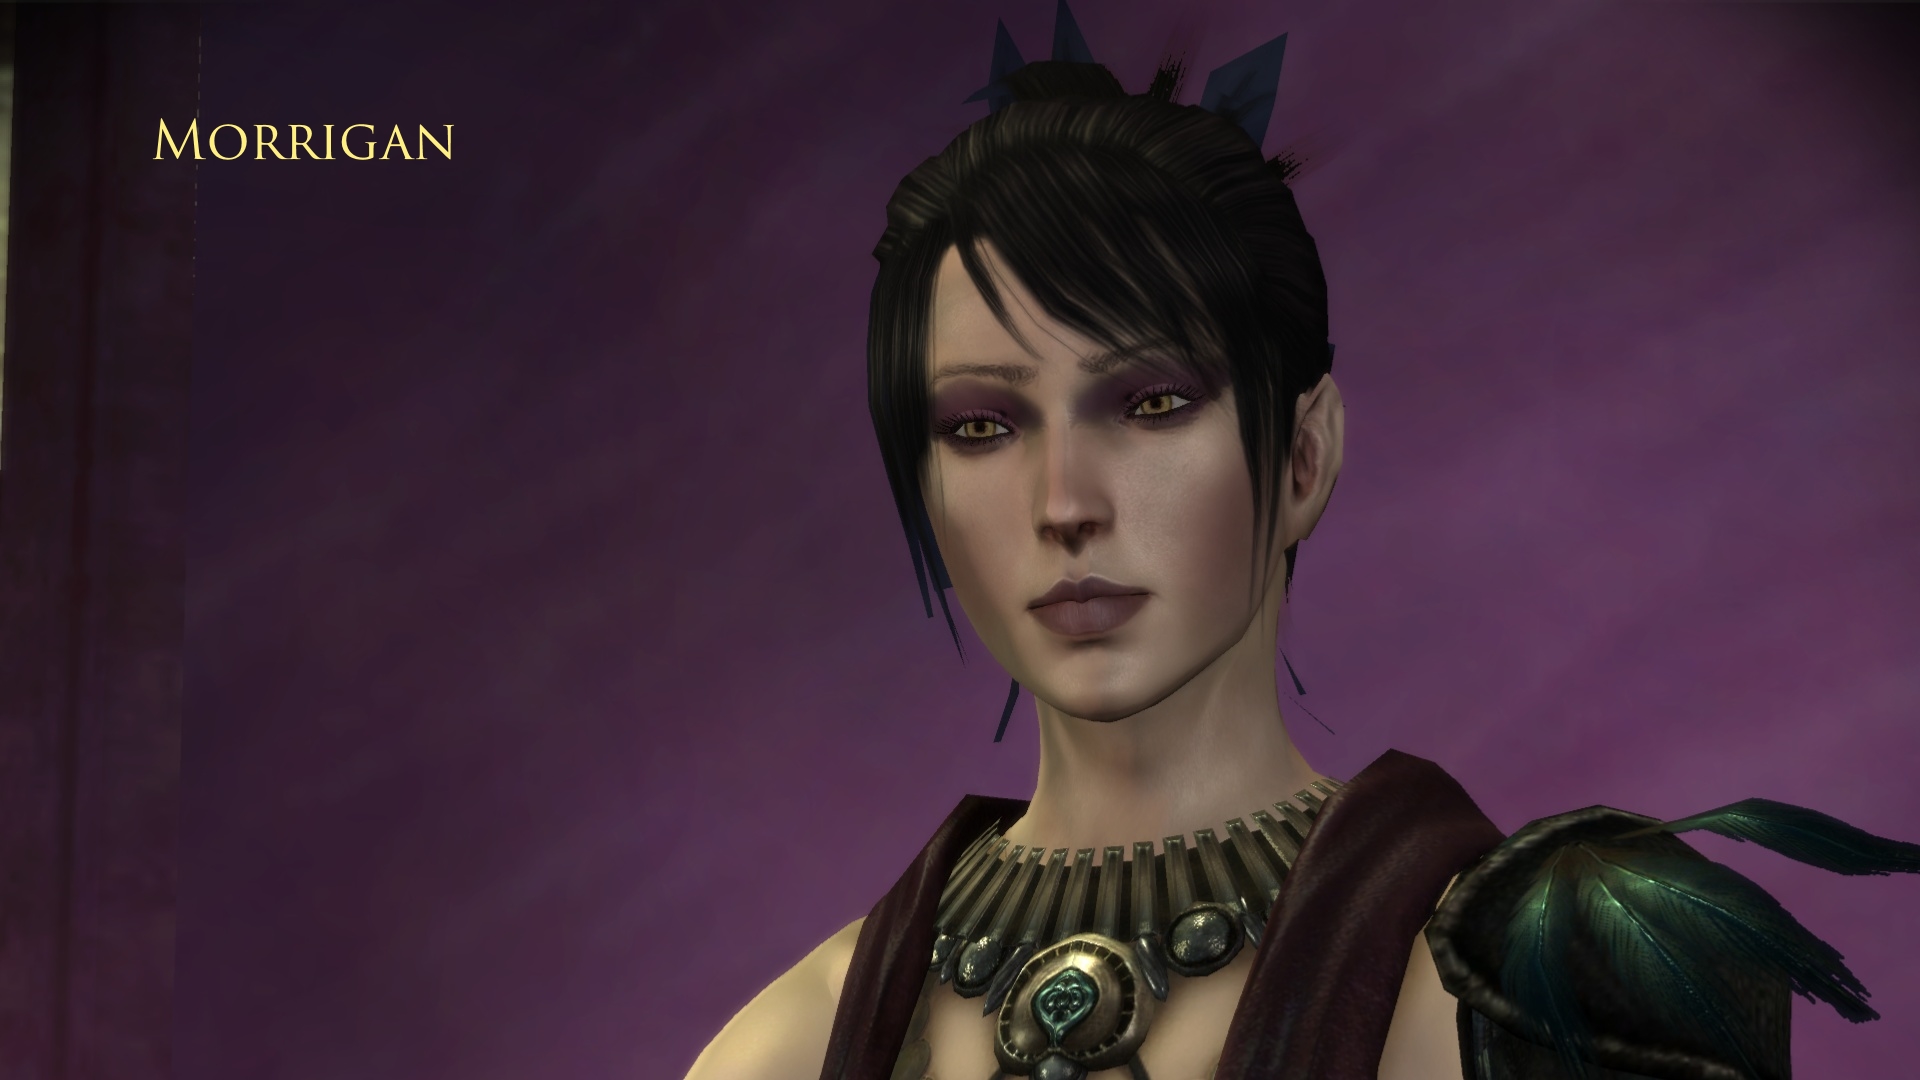 Morrigan is the cynical, cold and practical witch. She is also badass so don't mess with her.